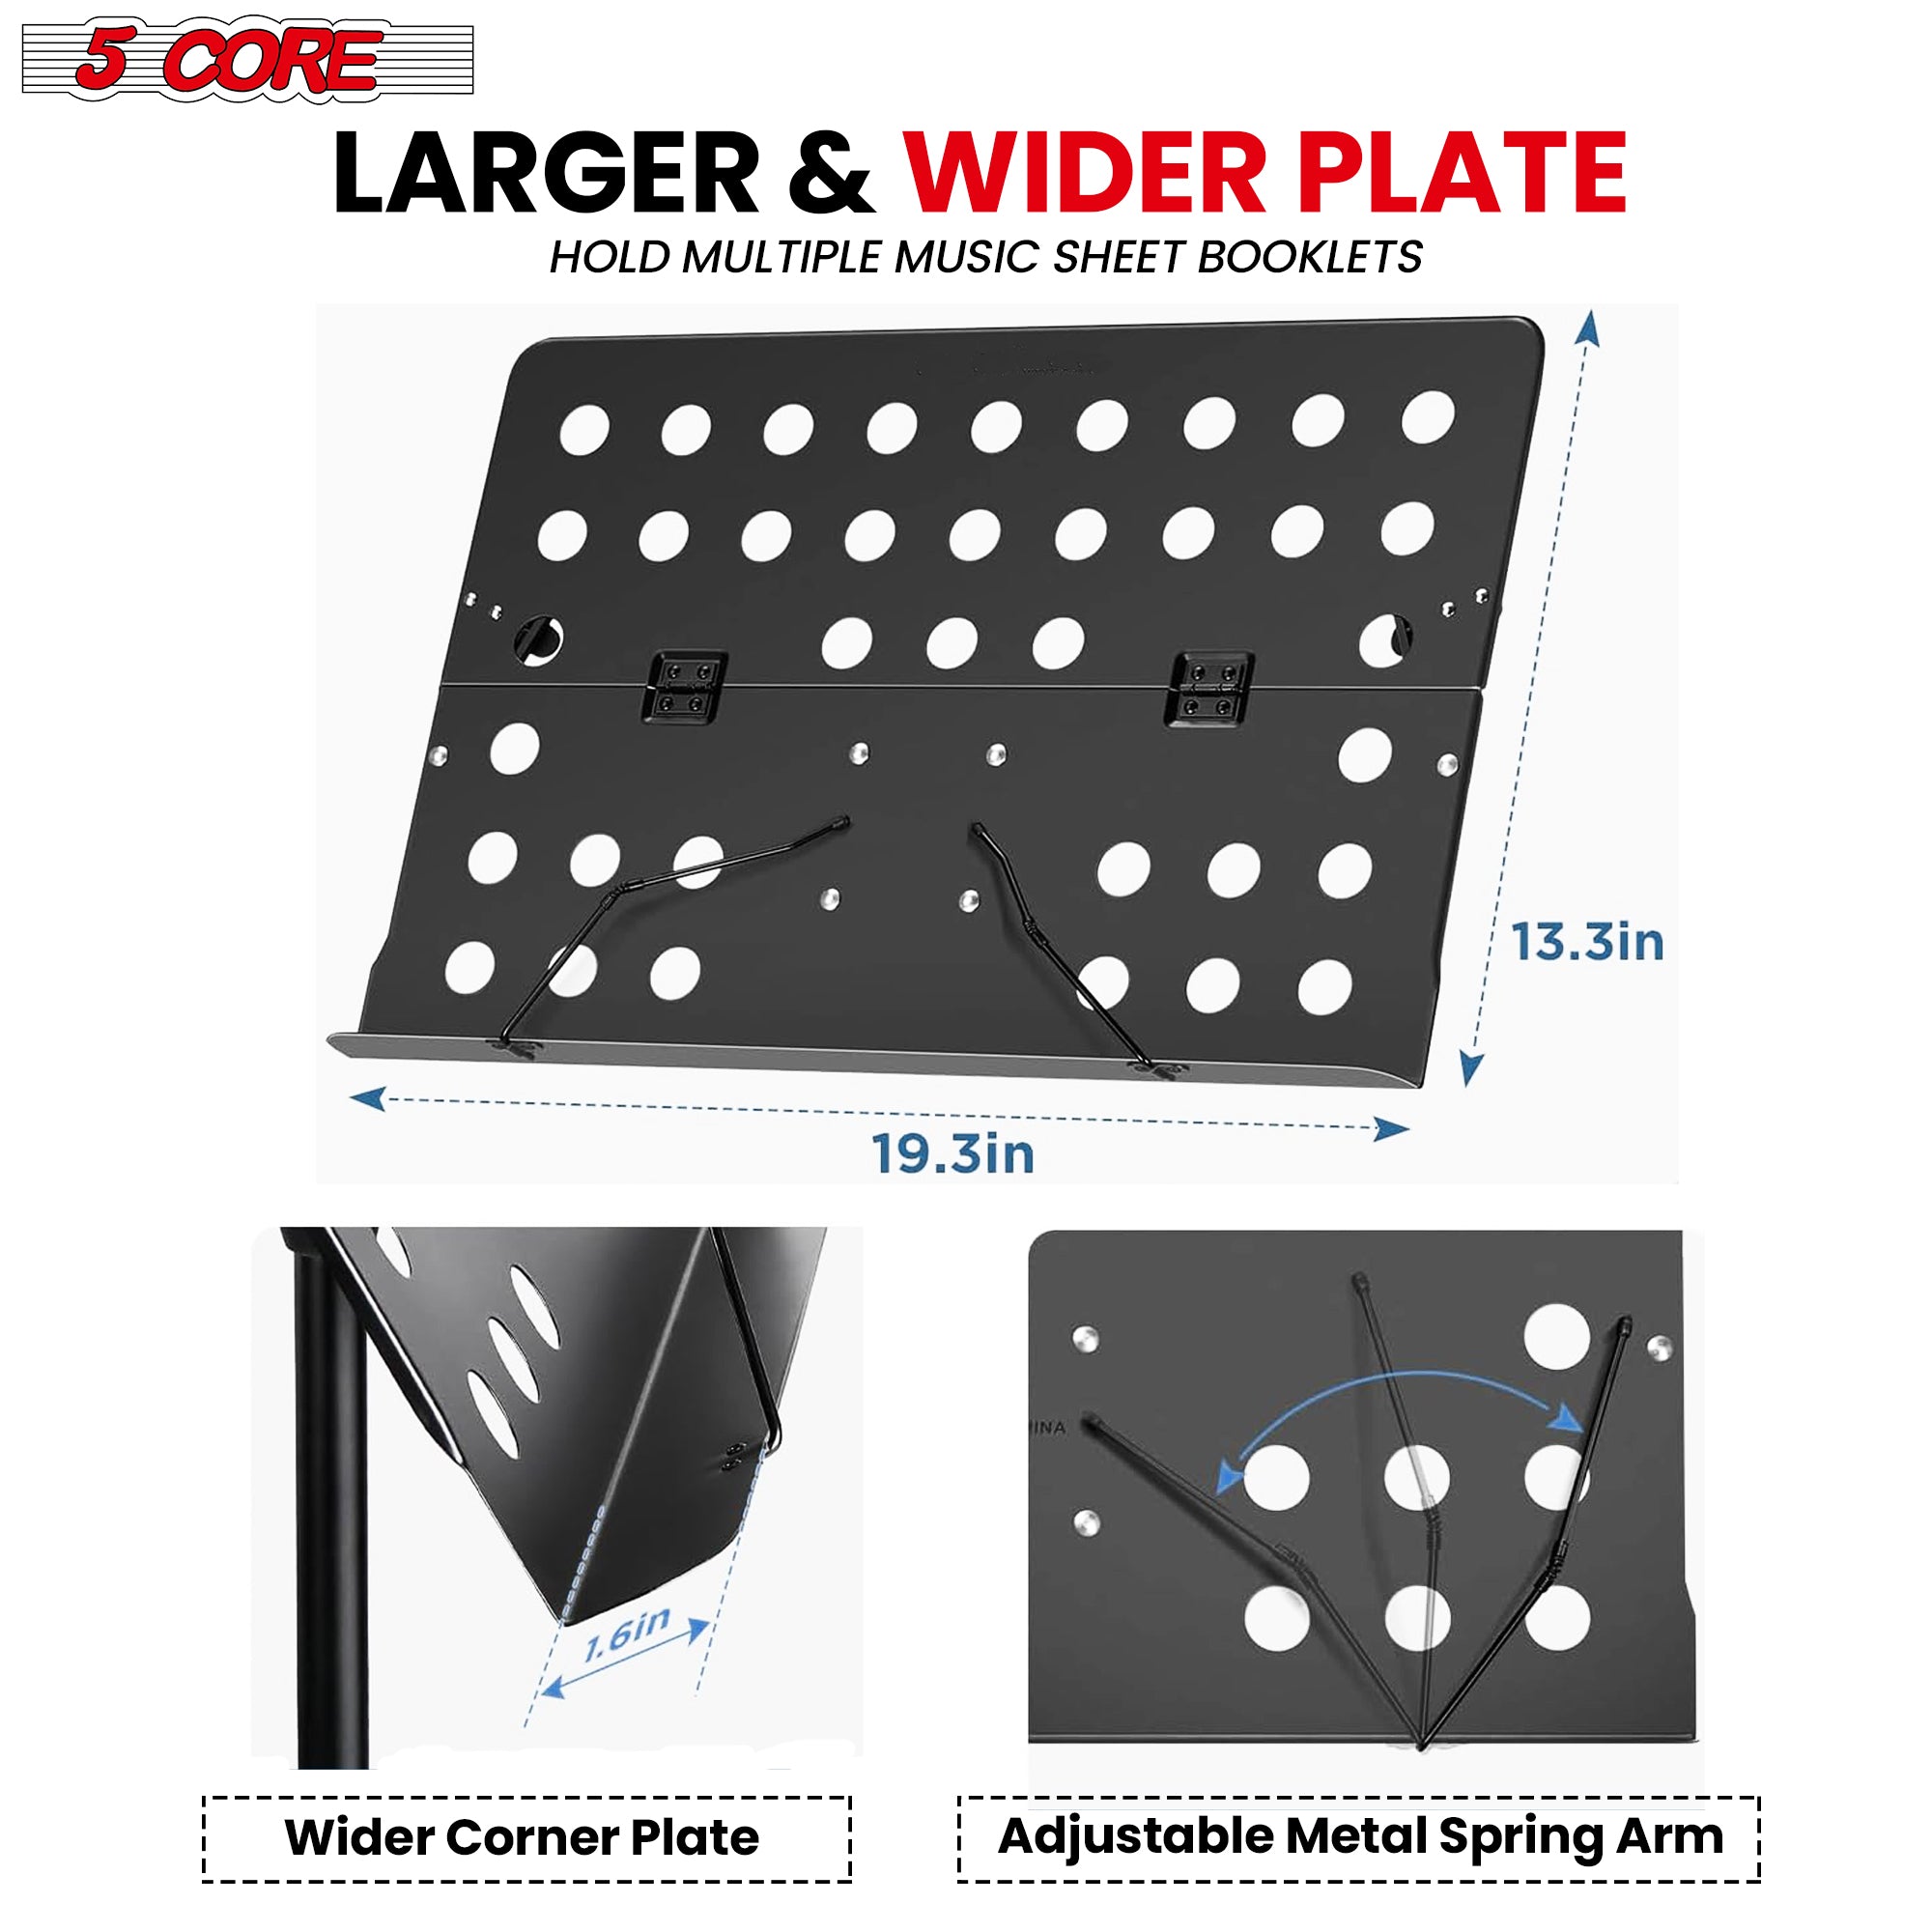 larger & wider plate